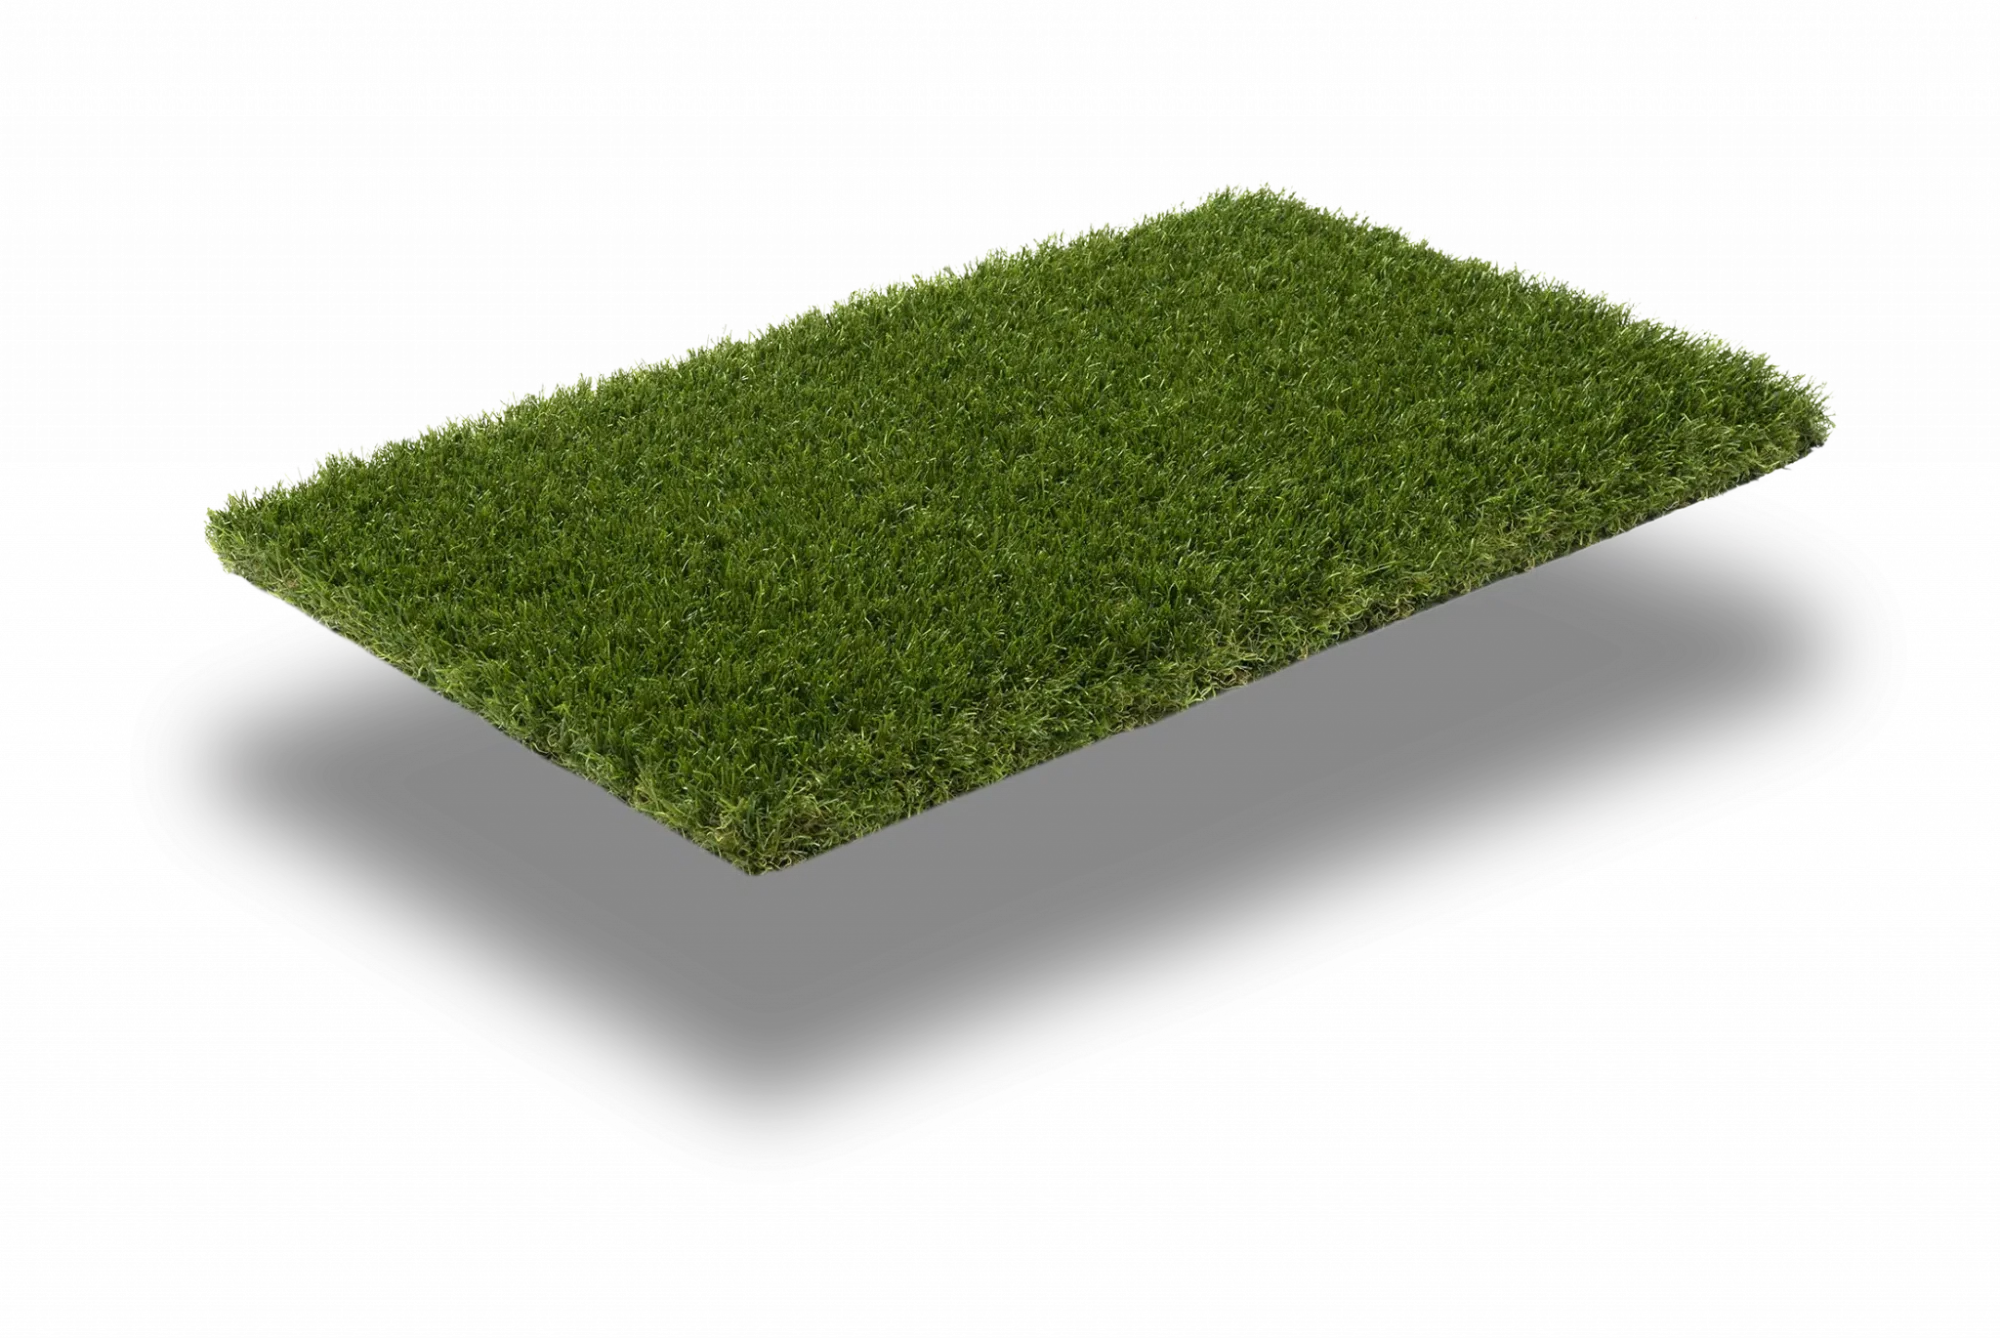 LazyLawn ONE DNA artificial grass